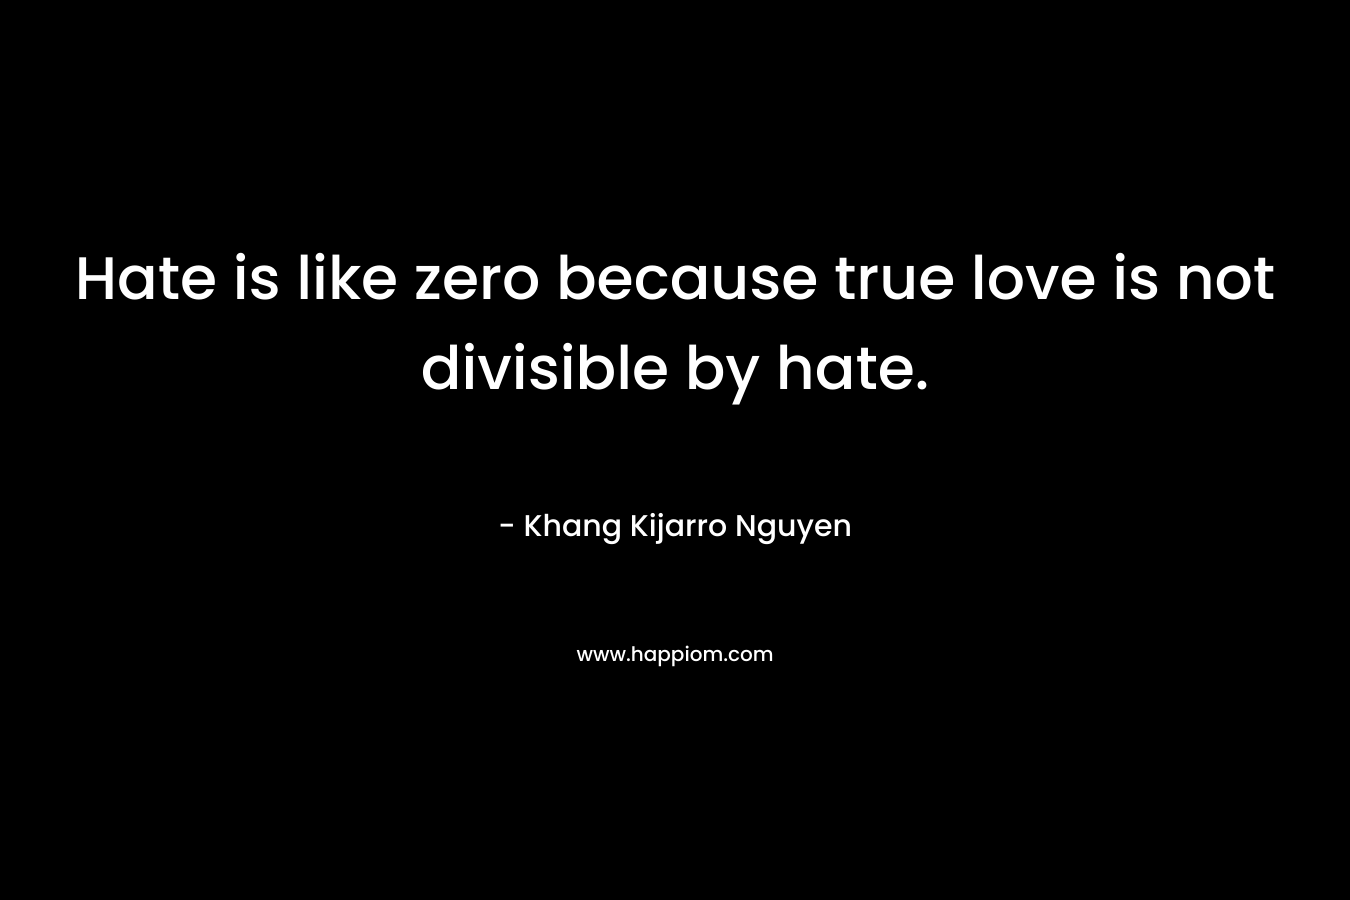 Hate is like zero because true love is not divisible by hate. – Khang Kijarro Nguyen